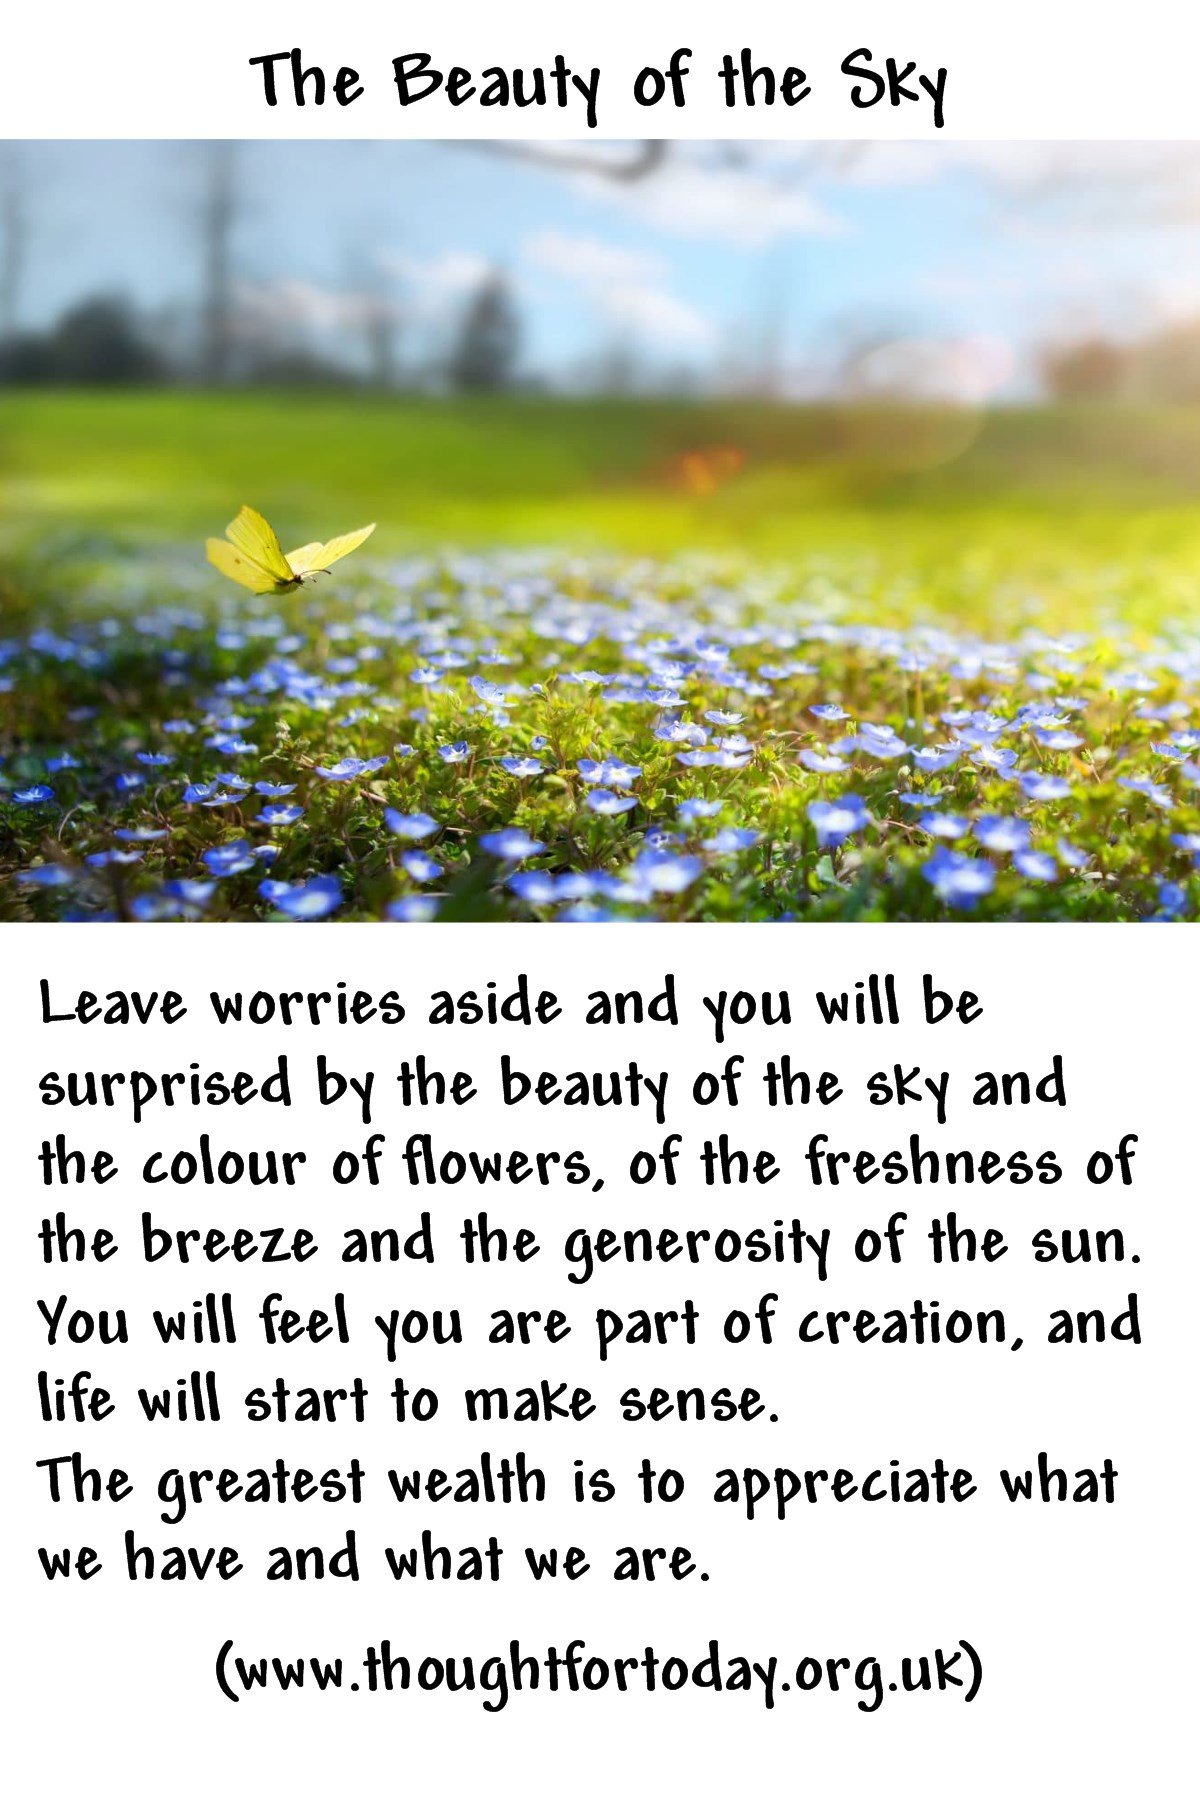 Leave worries aside and you will be surprised by the beauty of the sky and the colour of flowers, of the freshness of the breeze and the generosity of the sun. You will feel you are part of creation, and life will start to make sense.  The greatest wealth is to appreciate what we have and what we are.